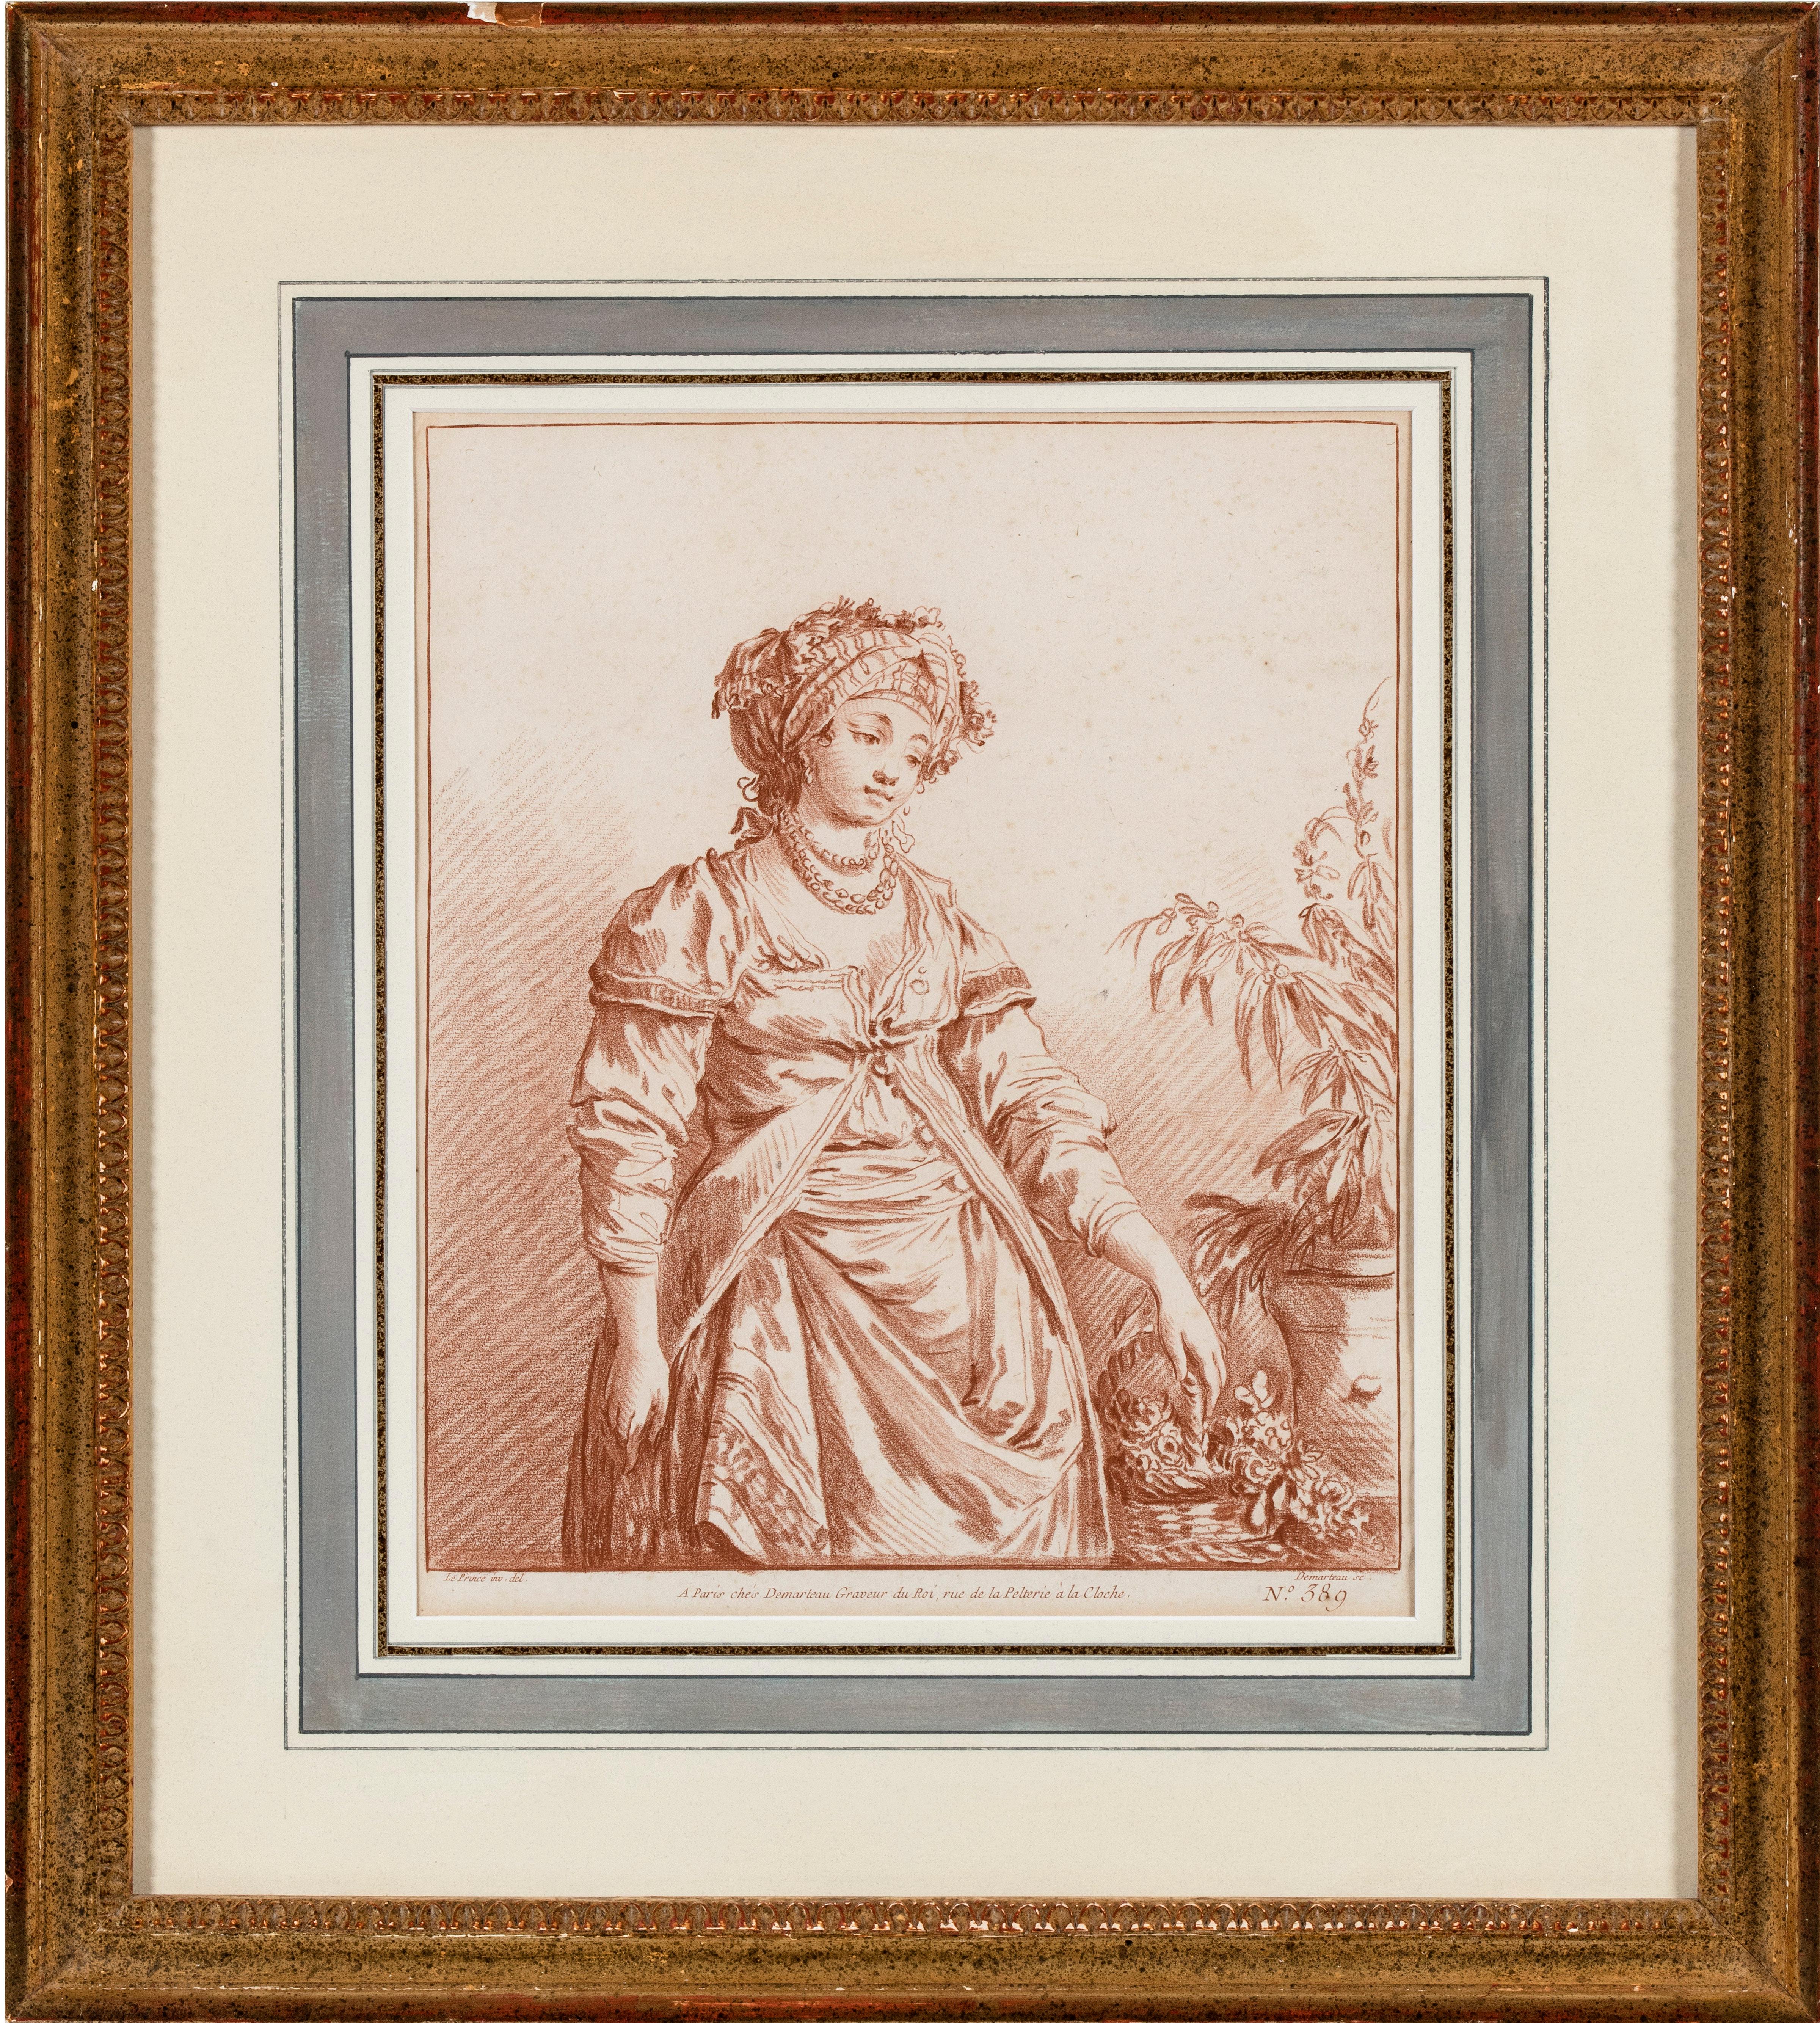 The pair consists of the present work and an engraving after it by the hand of Giles DeMarteau (Liège 1722 – 1776 Paris) titled Woman in Fantasy Costume, after Jean Baptiste Le Prince, and measuring, 10 ⅜ x 8 ⅝ inches (26.5 x 22 cm).

DeMarteau's